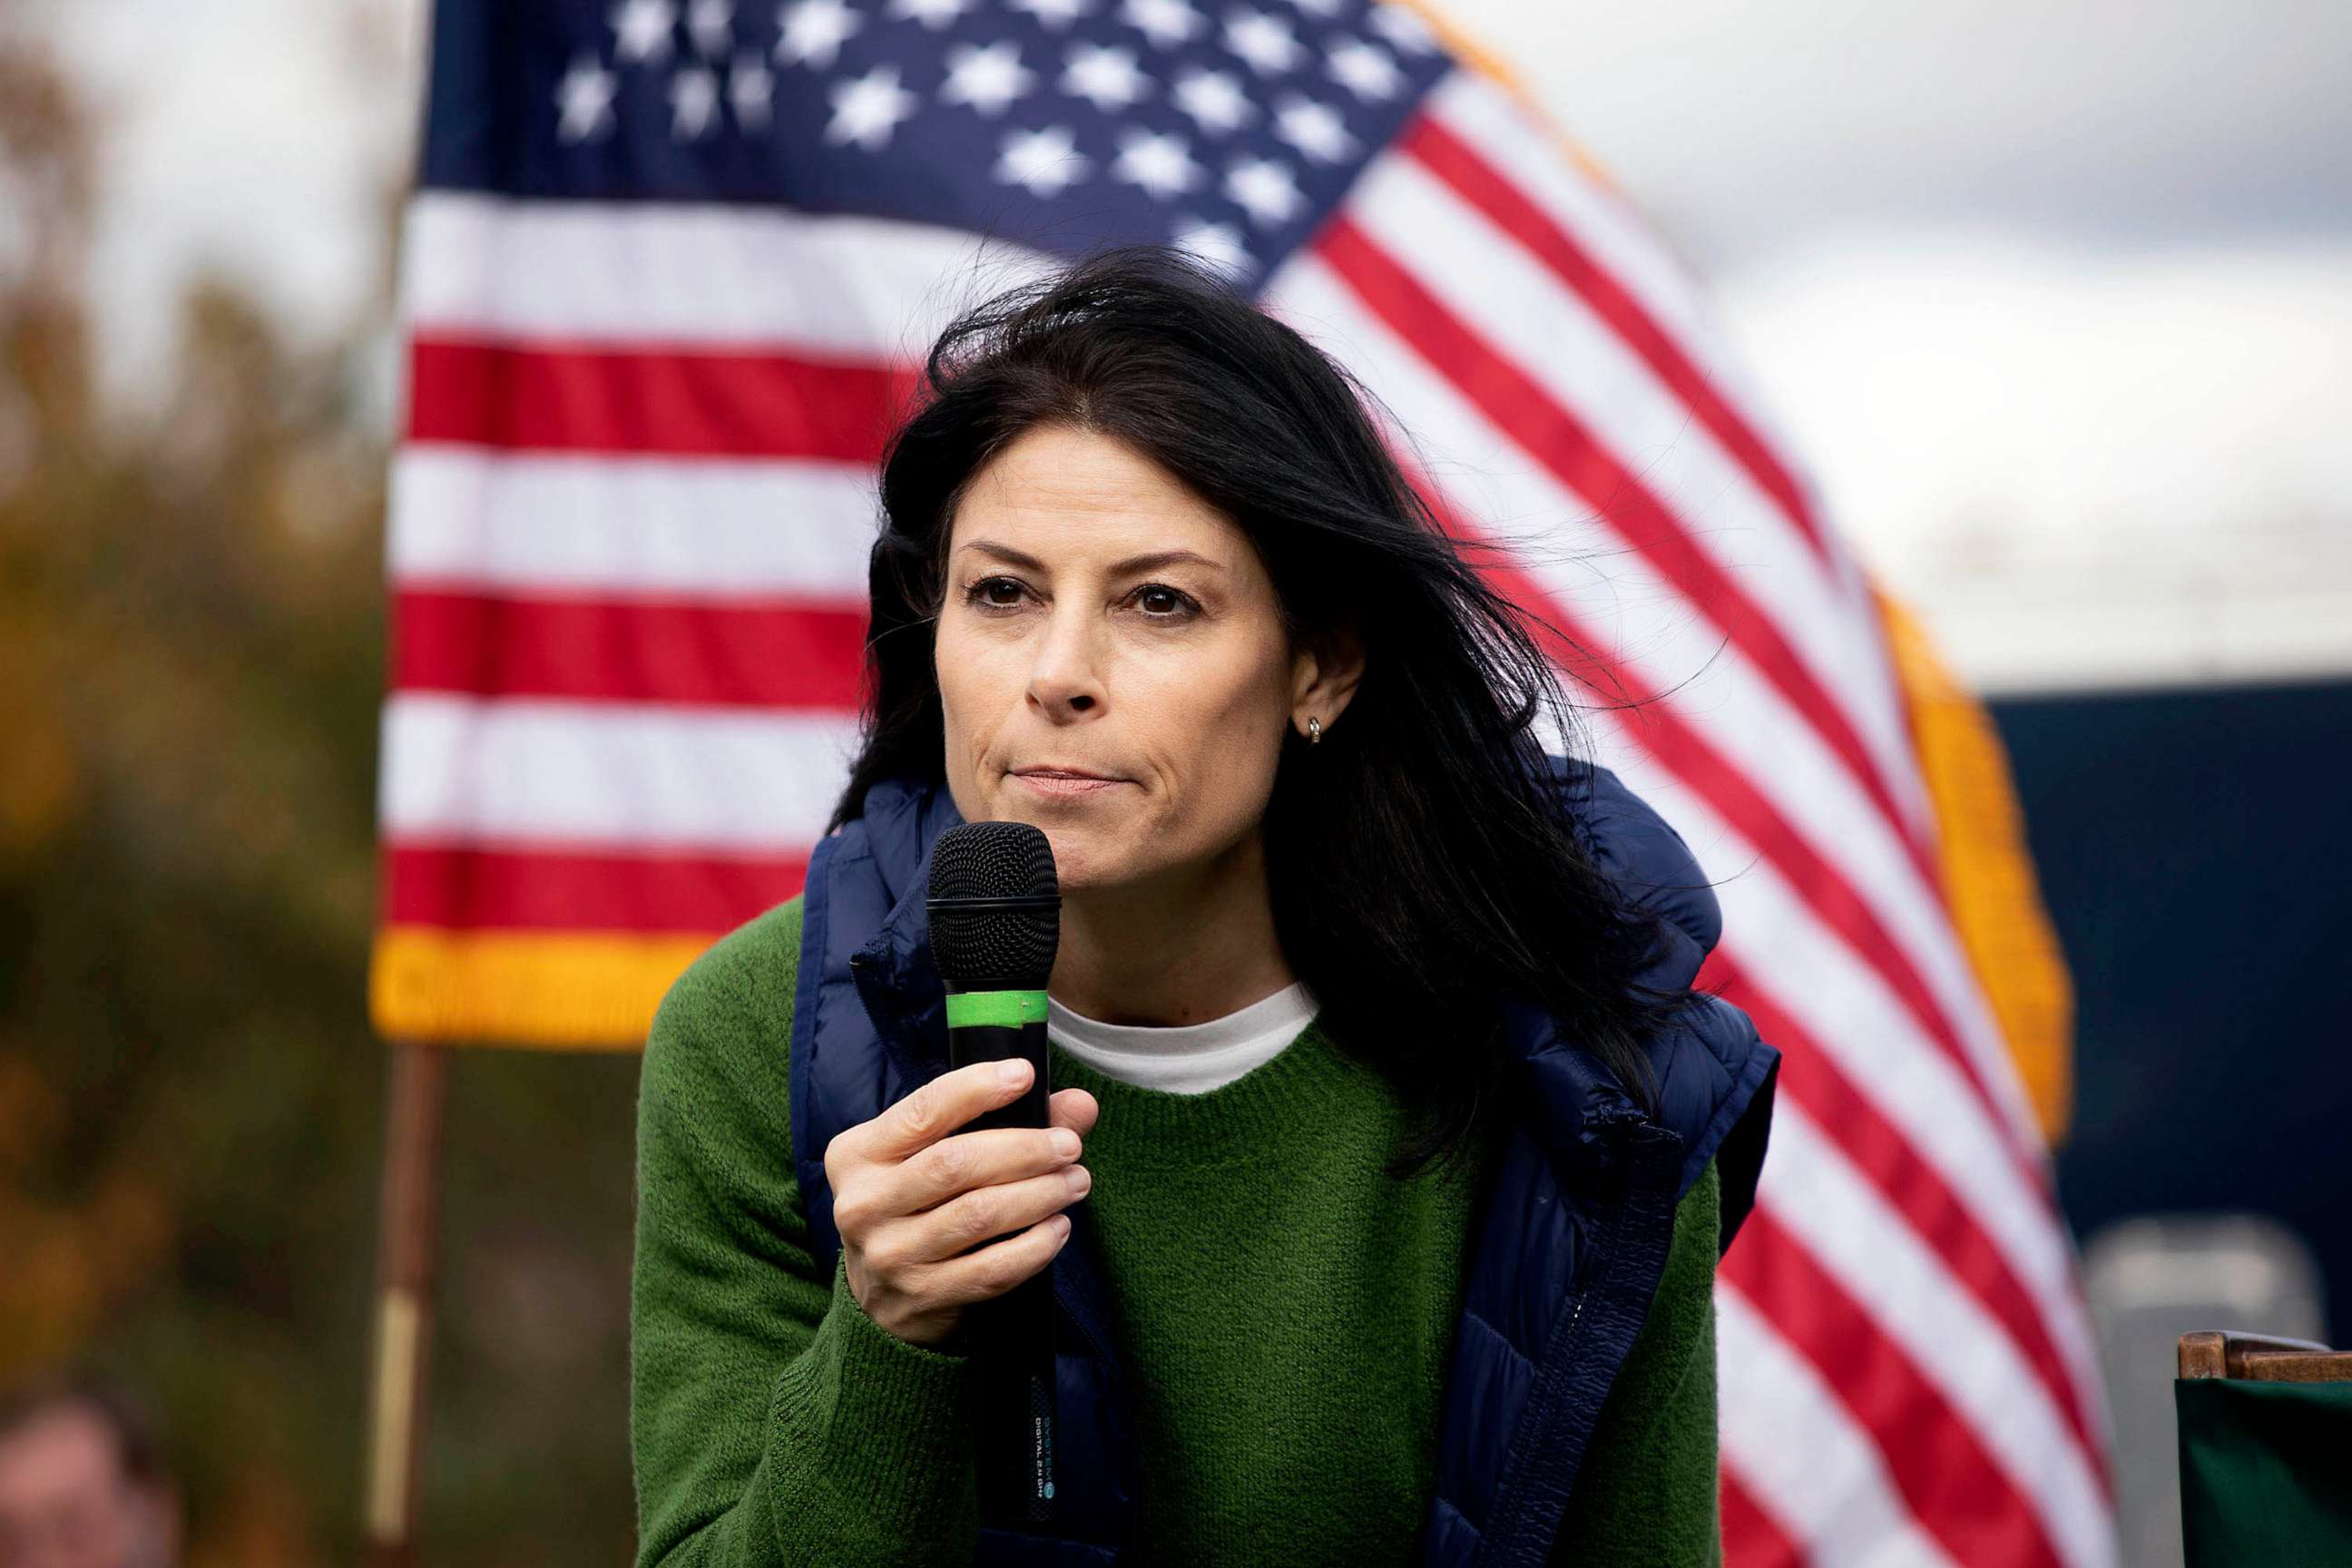 PHOTO: FILE - U.S. Michigan Attorney General Dana Nessel speaks at a campaign rally, Oct. 16, 2022 in East Lansing, Mich.